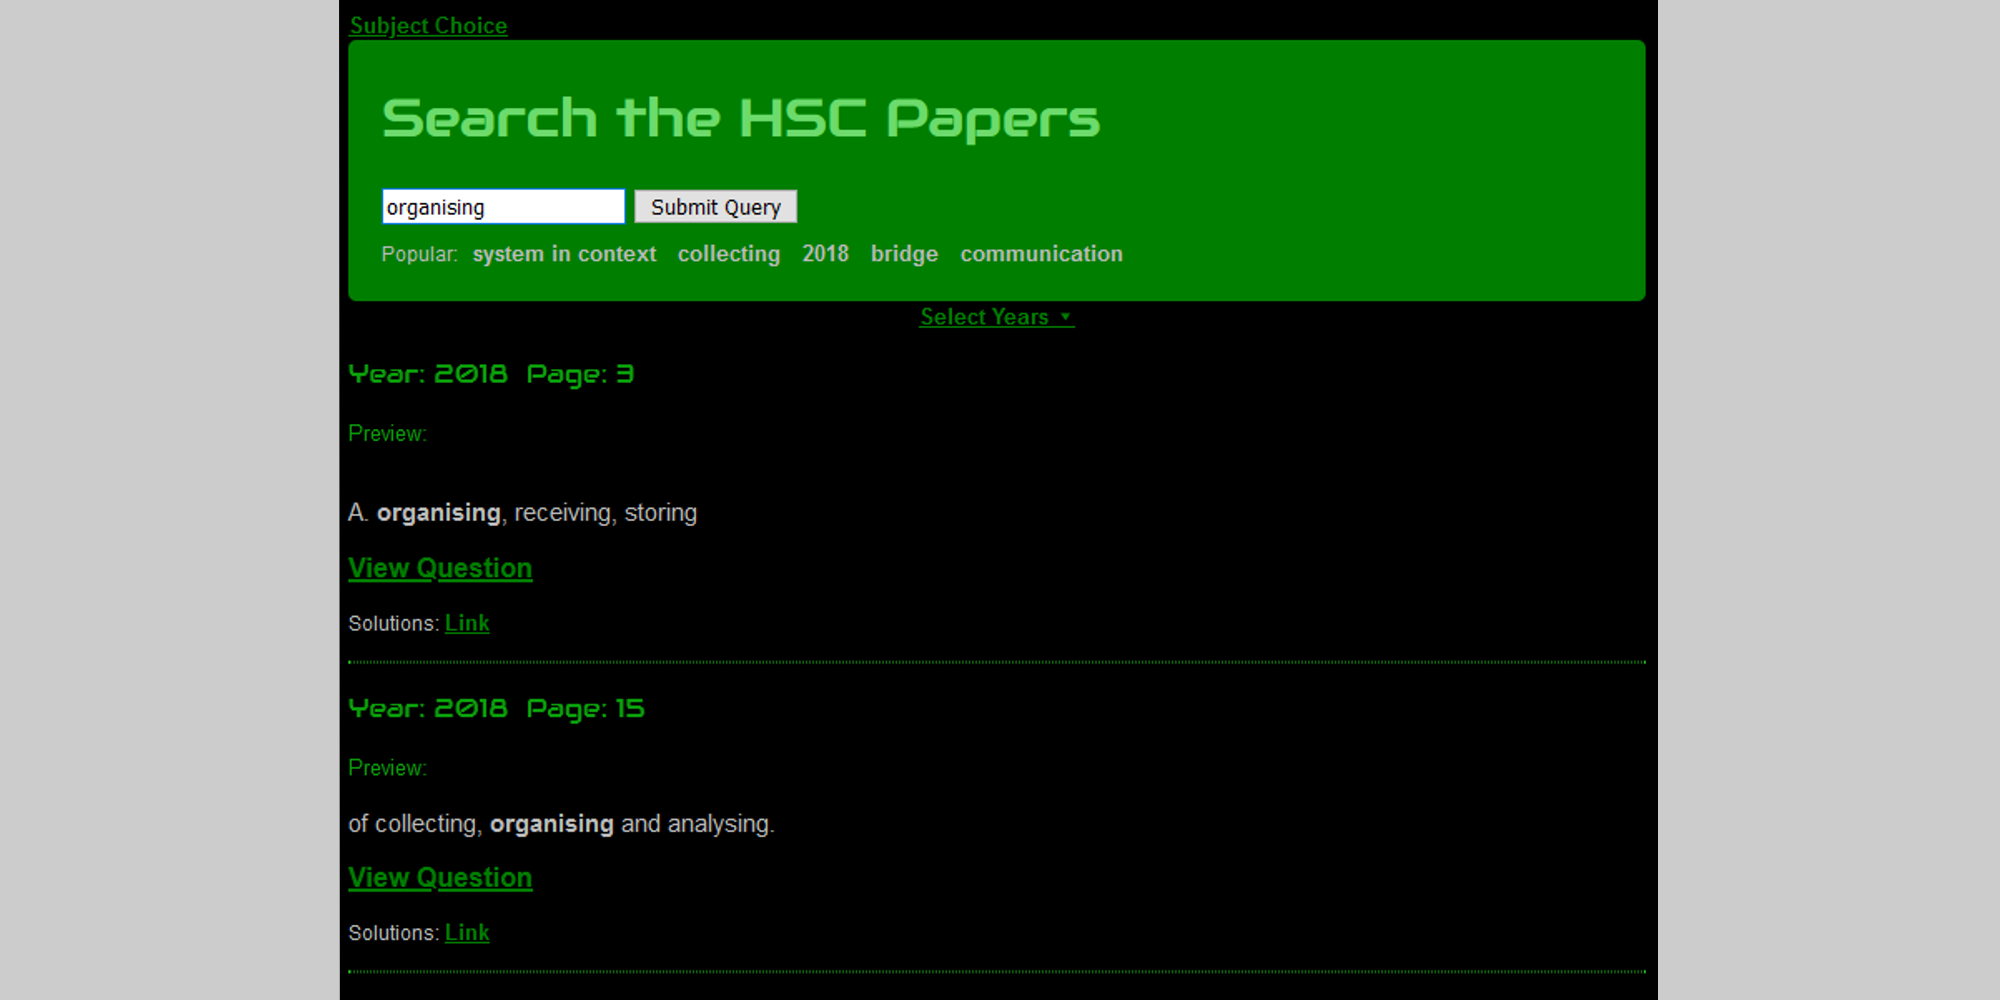 Cover Image for App: HscSearch.com